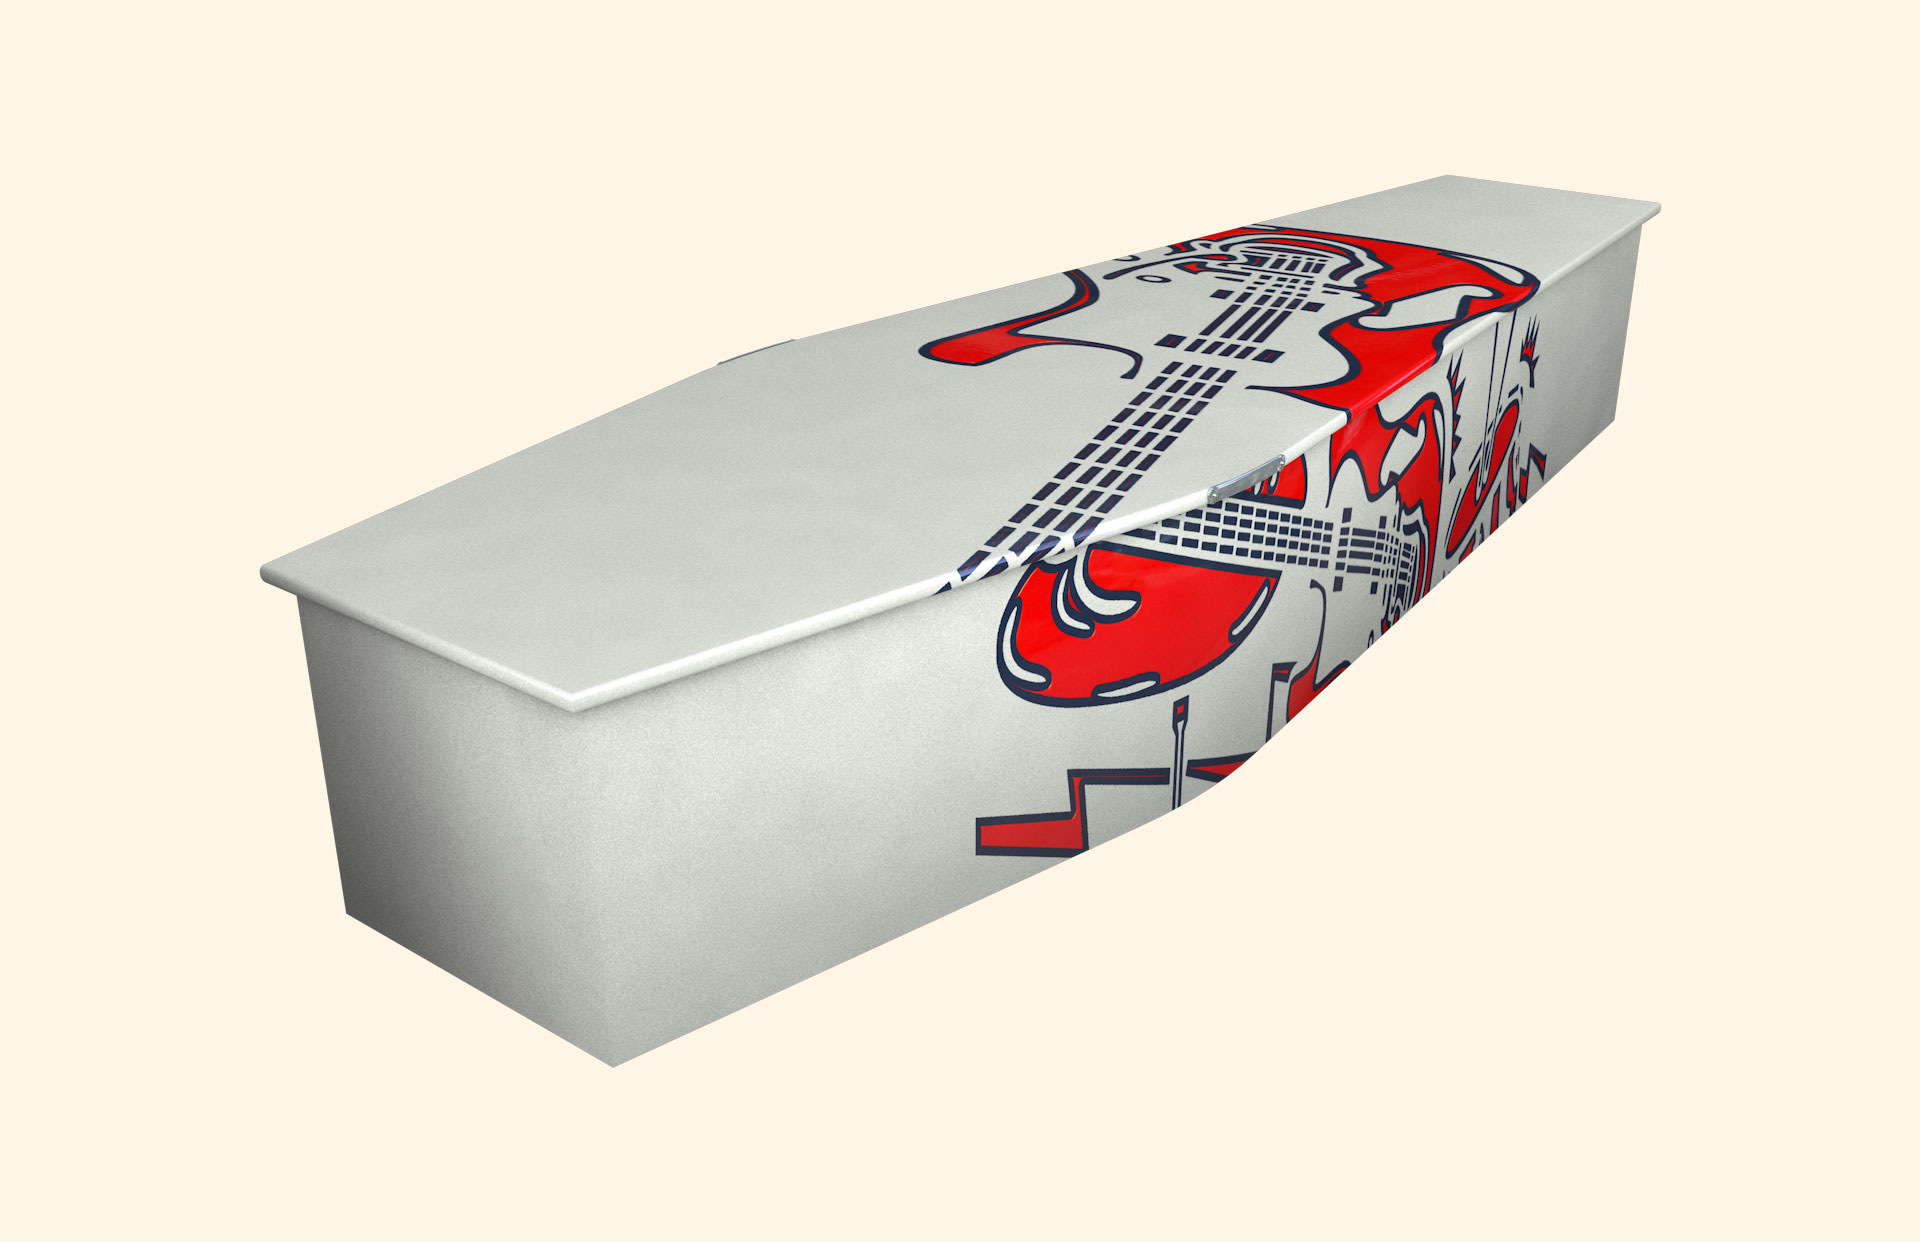 Rock n Roll Red design on a traditional coffin